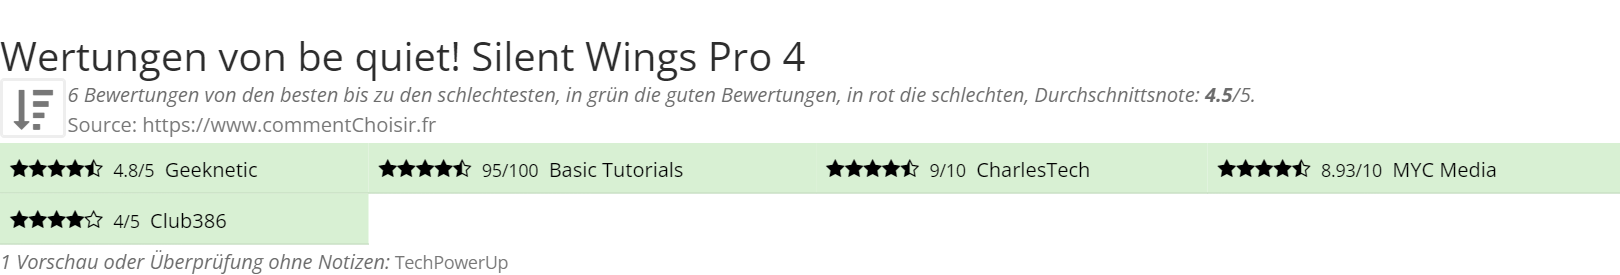 Ratings be quiet! Silent Wings Pro 4